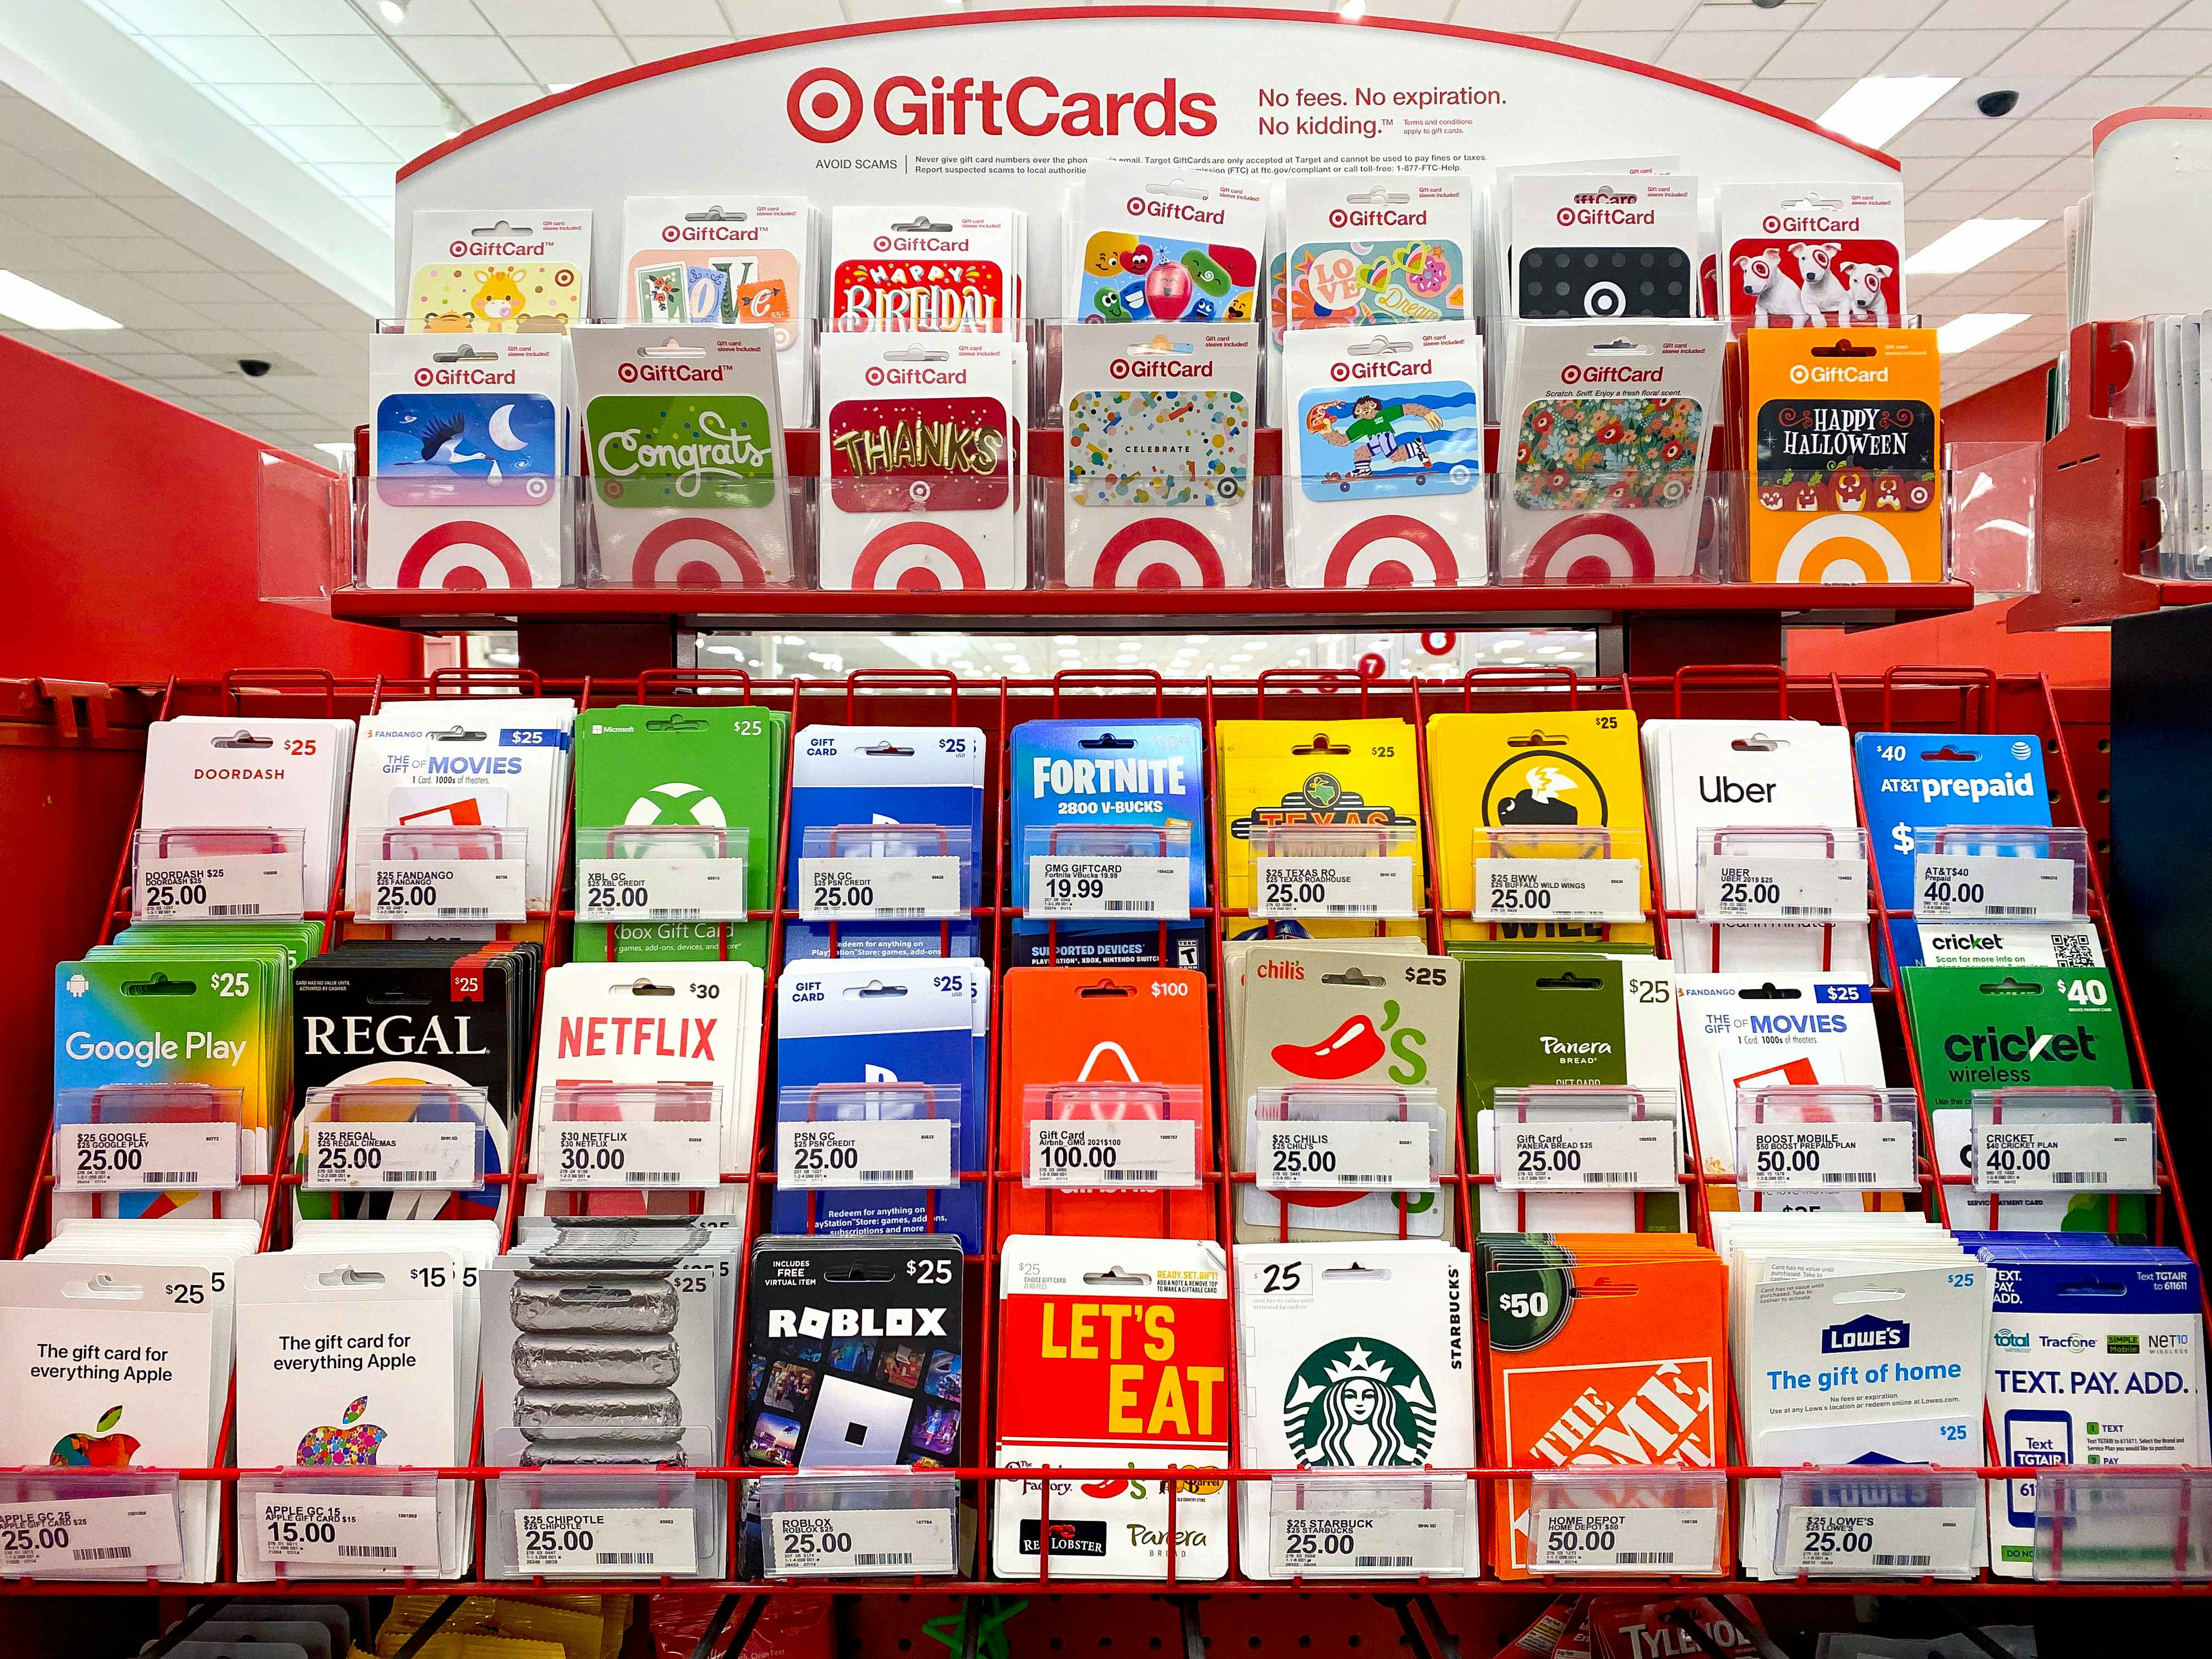 TODAY ONLY get a FREE $5 gift card for every $25 in gift cards